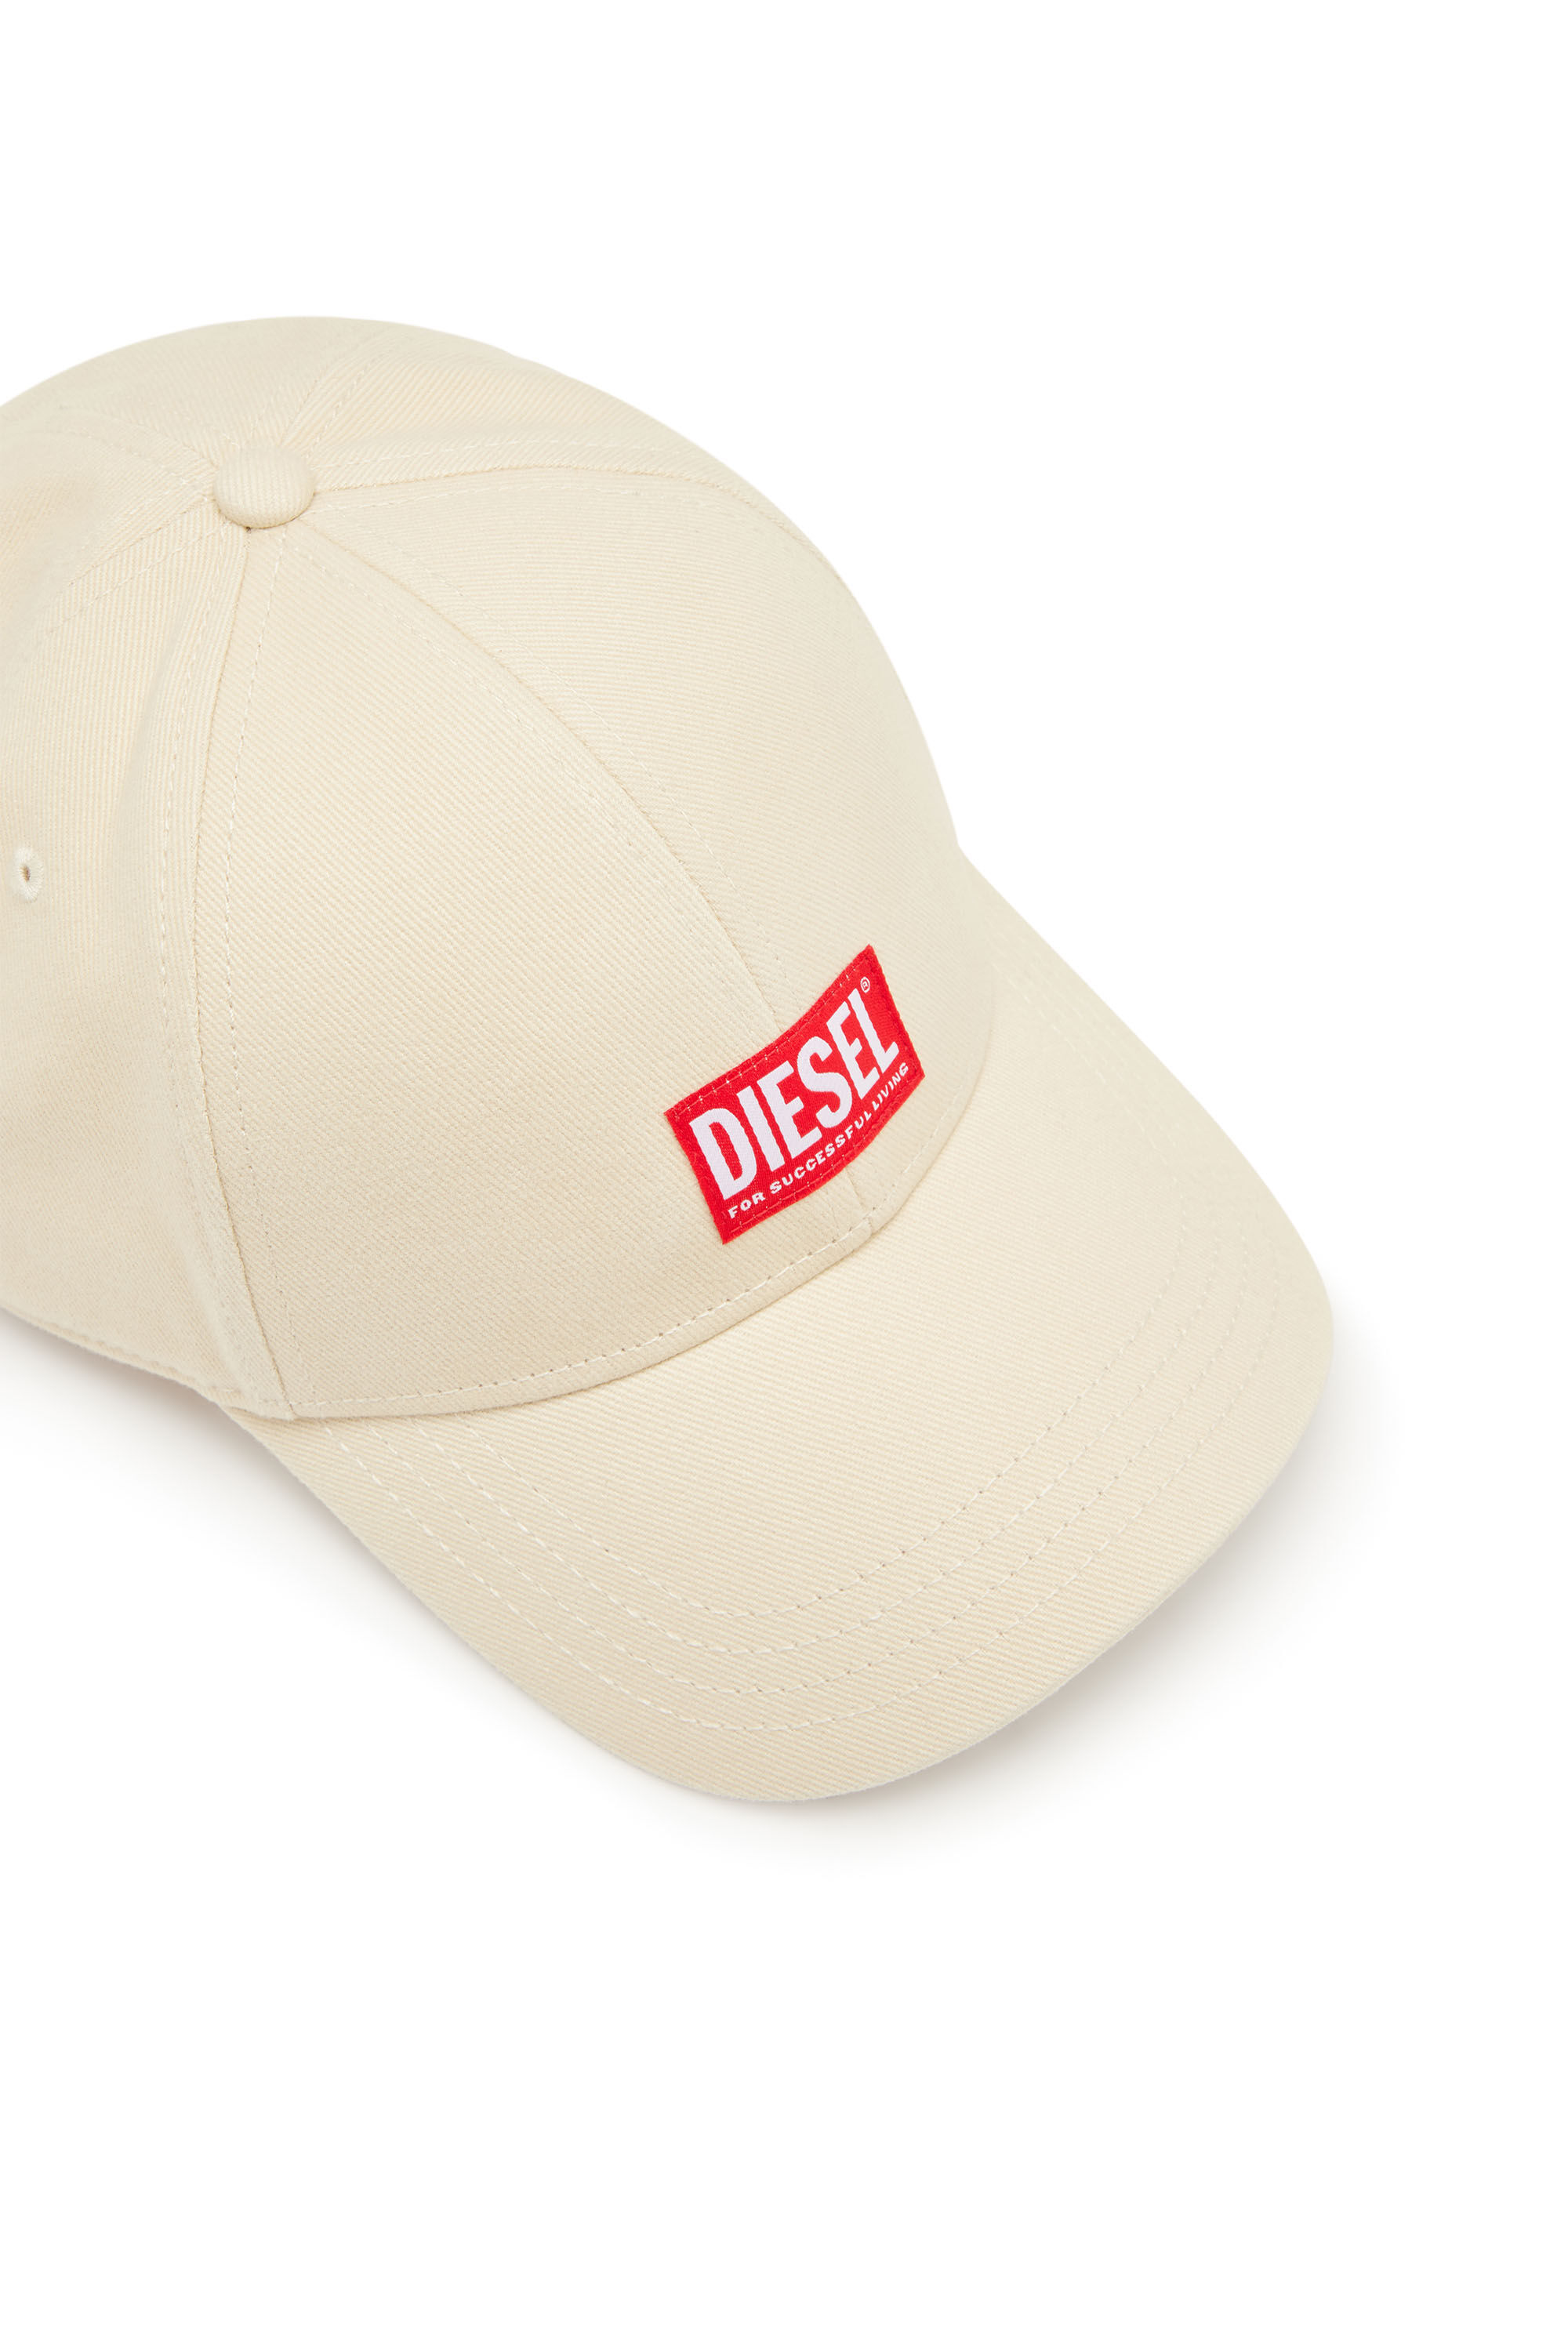 Men's Baseball cap with logo patch | Diesel CORRY-JACQ-WASH